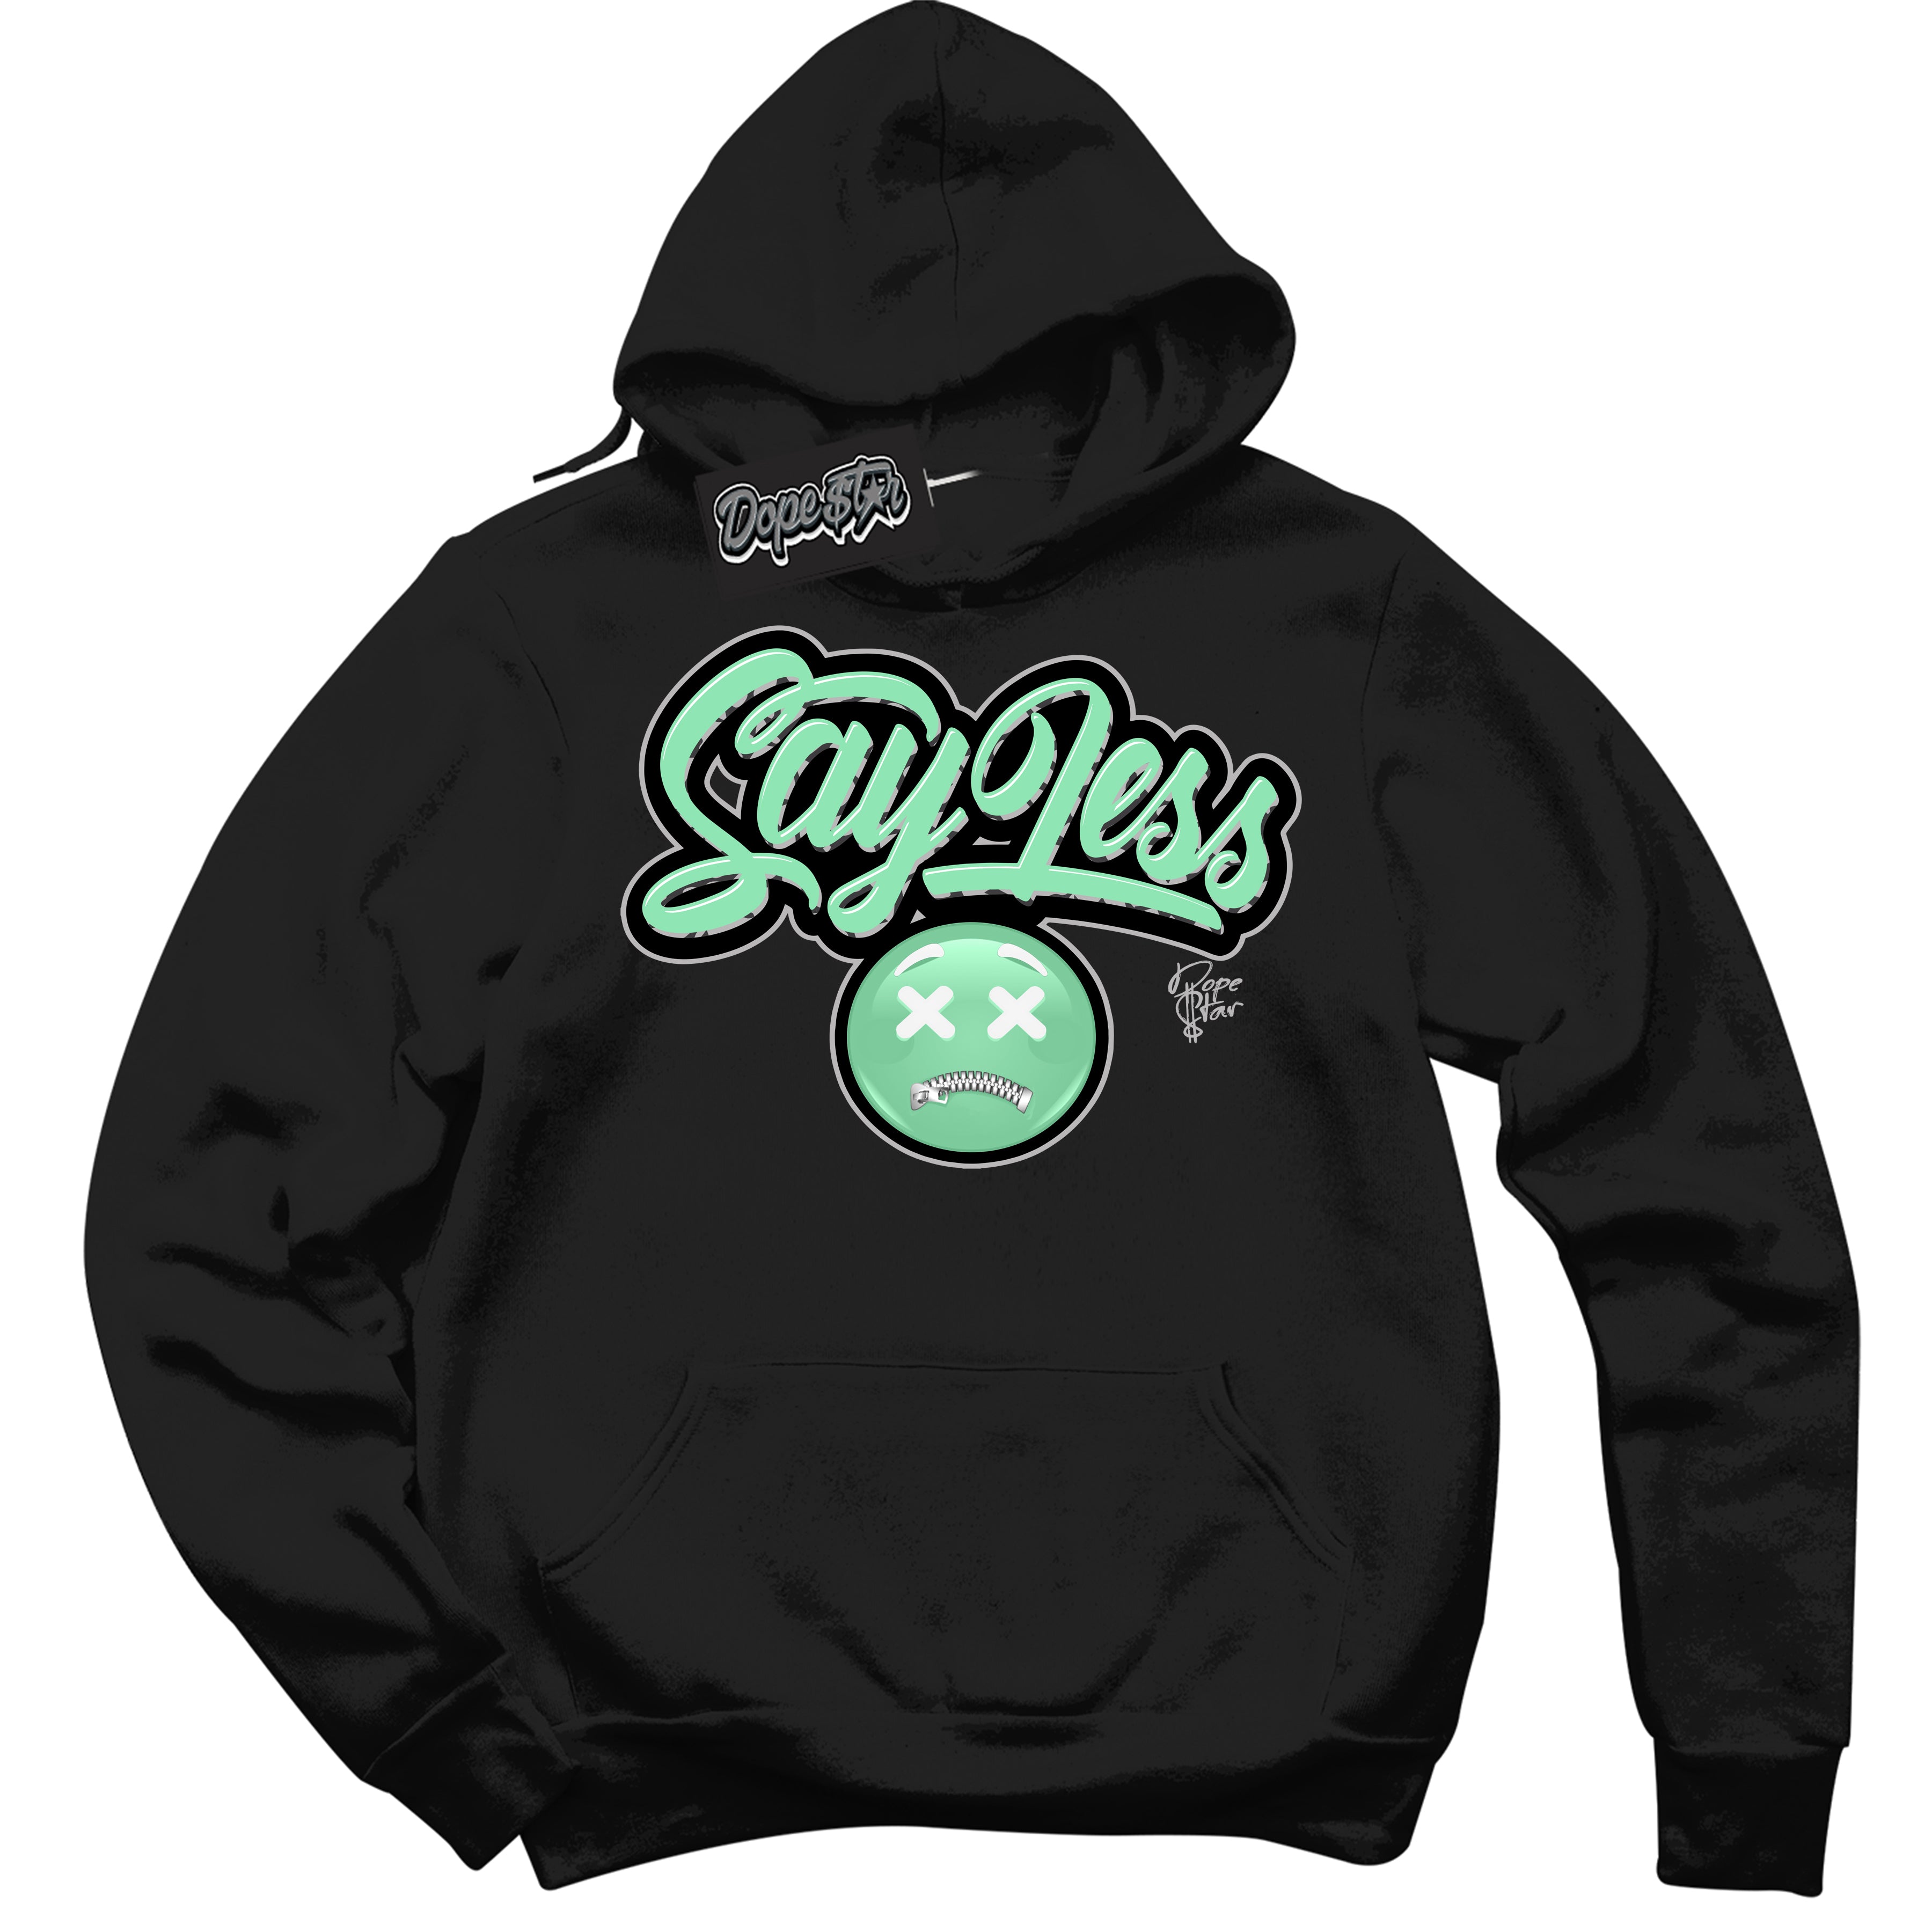 Cool Black Graphic DopeStar Hoodie with “ Say Less “ print, that perfectly matches Green Glow 3S sneakers